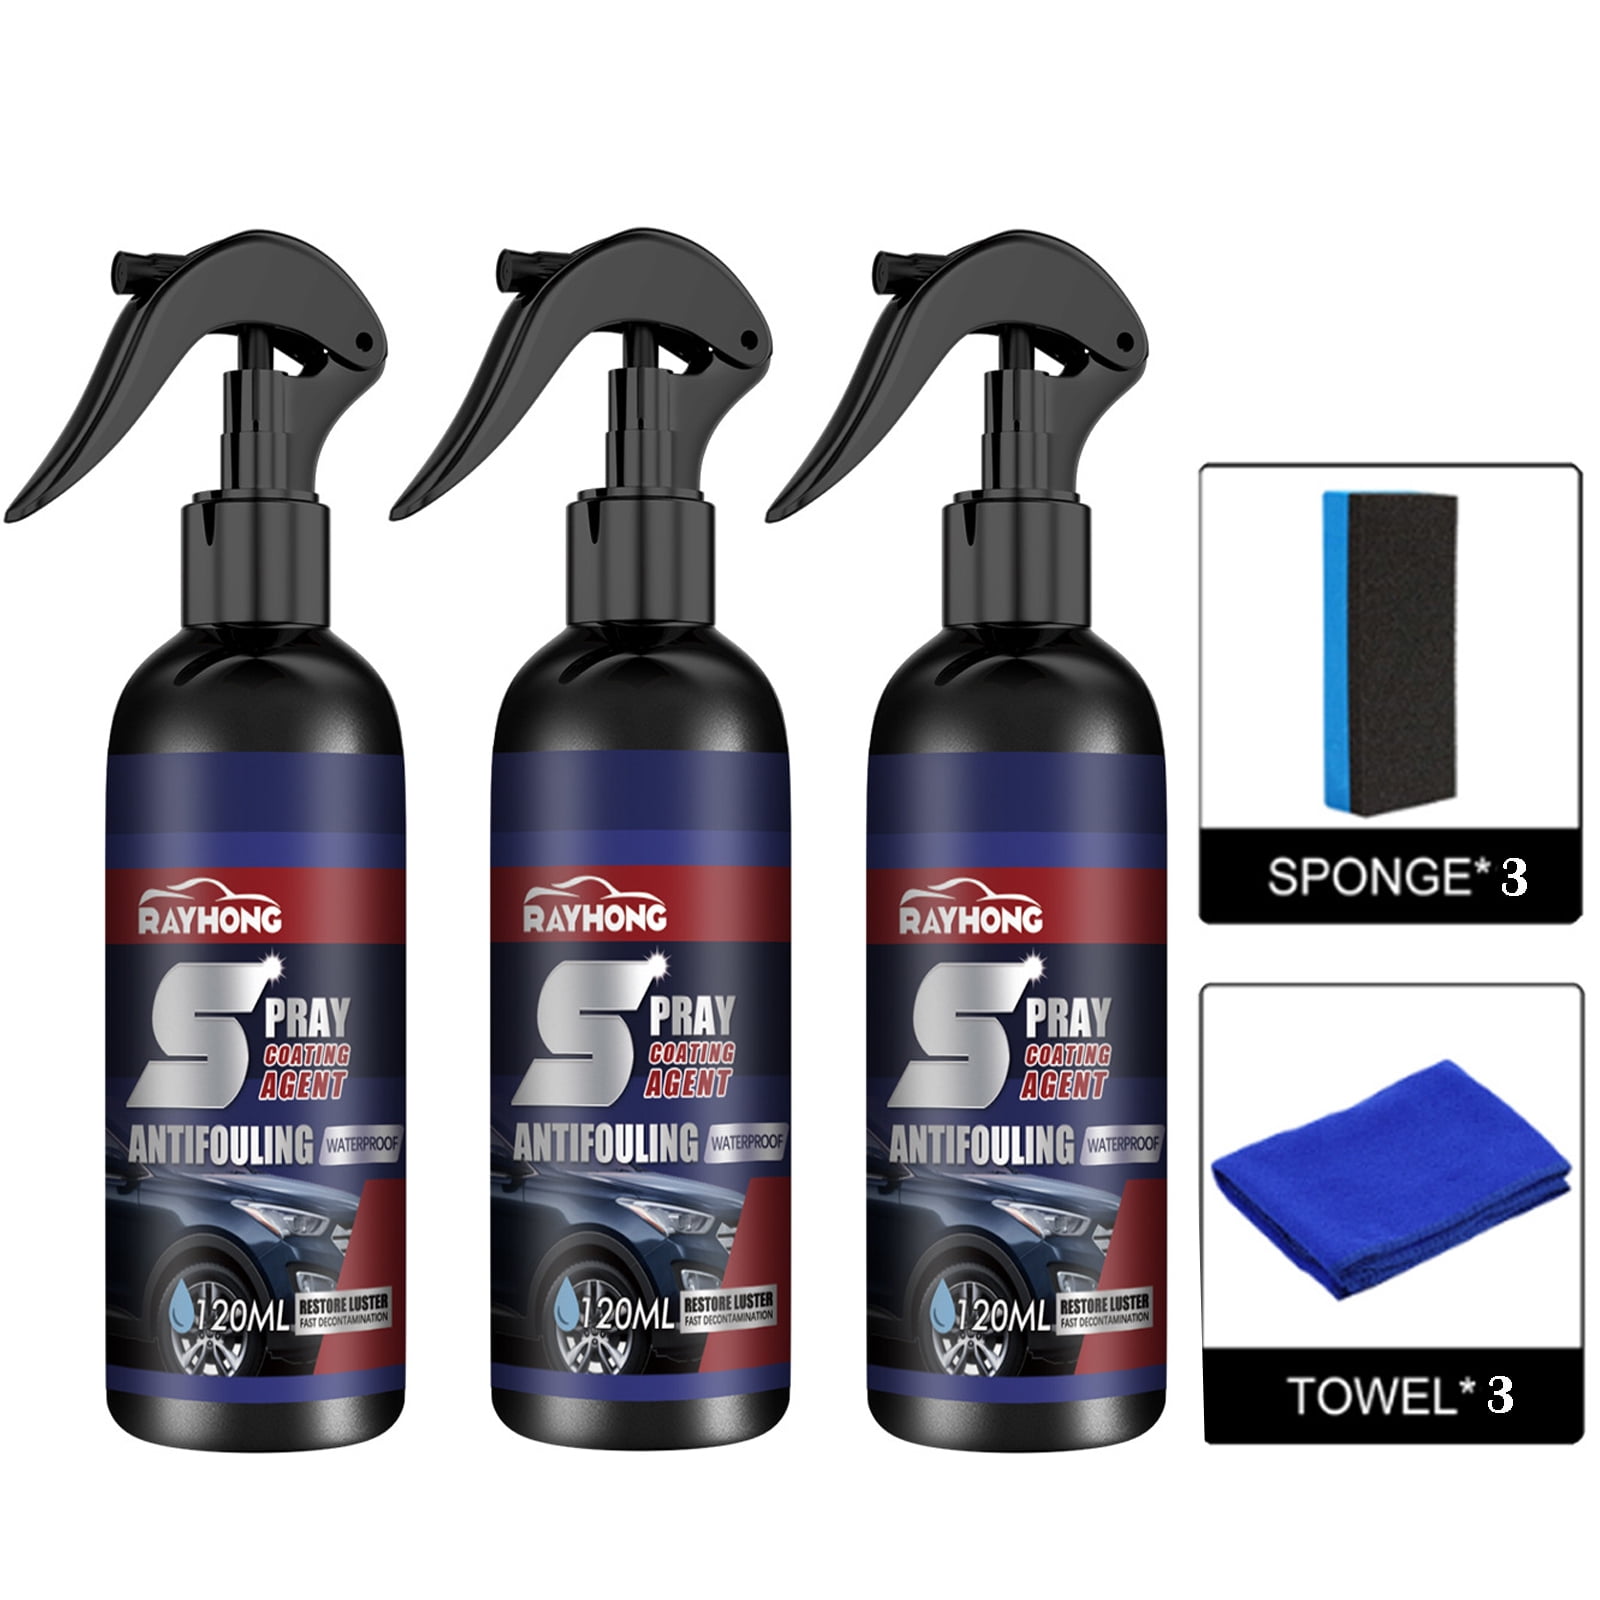 Spray Coating Agent for Cars Unboxing and Review - Does It Really Work? 